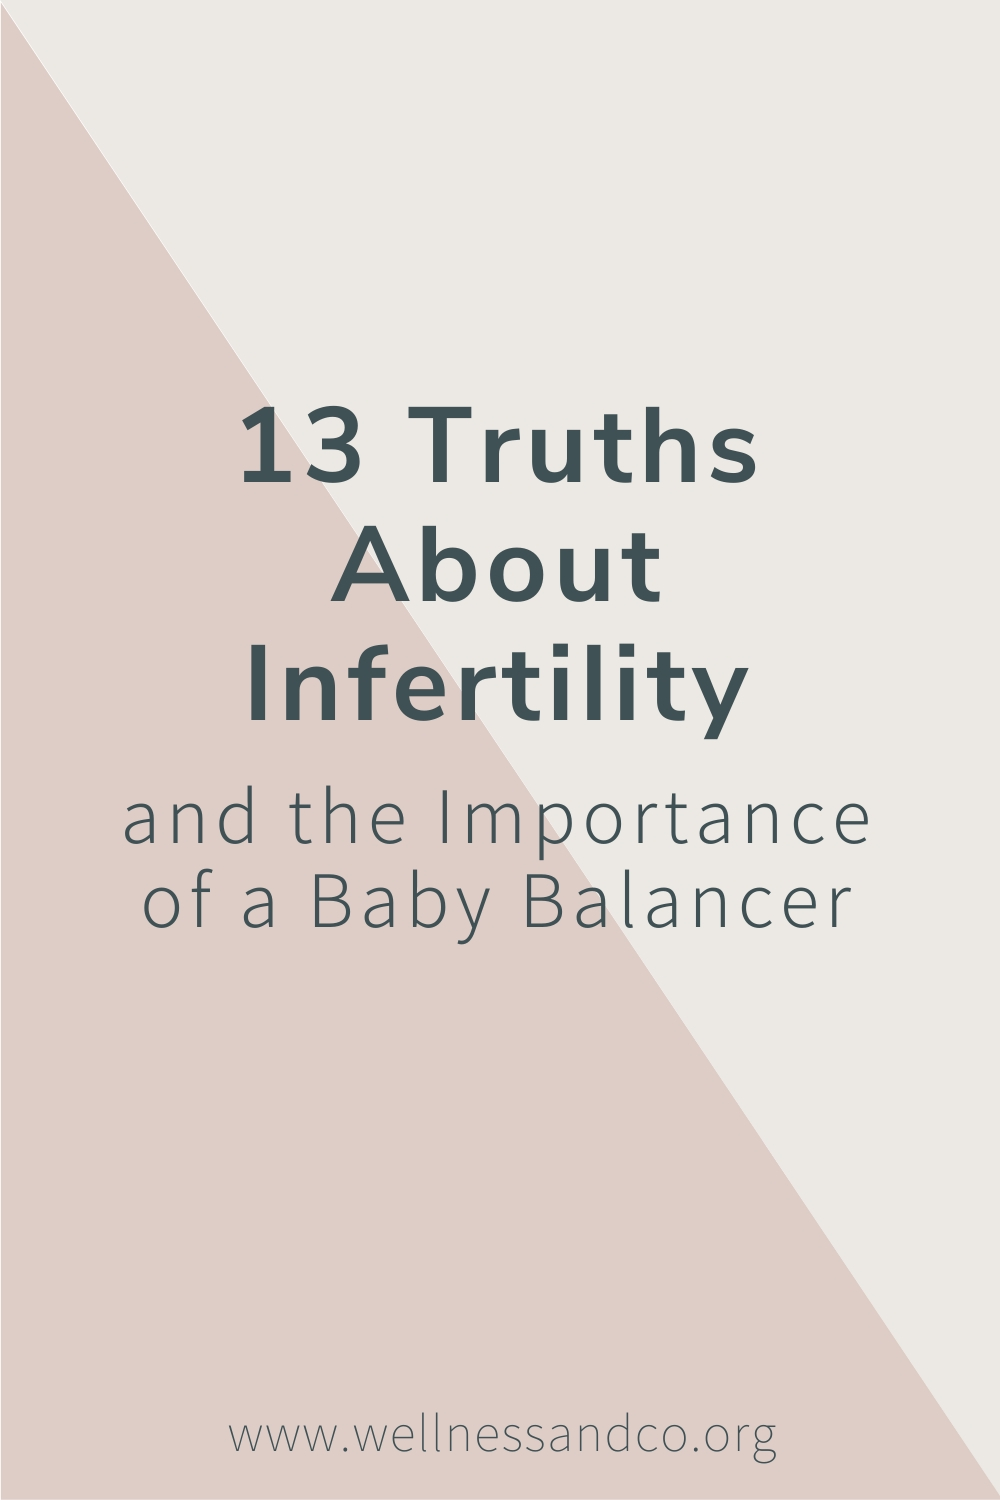 13 Truths About Infertility and the Importance of a Baby Balancer | Infertility can be one of the most difficult journeys a woman takes. Learn more about how this experience impacts women with 13 truths. You'll also learn what the term baby balancer means and how you can be more supportive to women in this season of life, cheers!